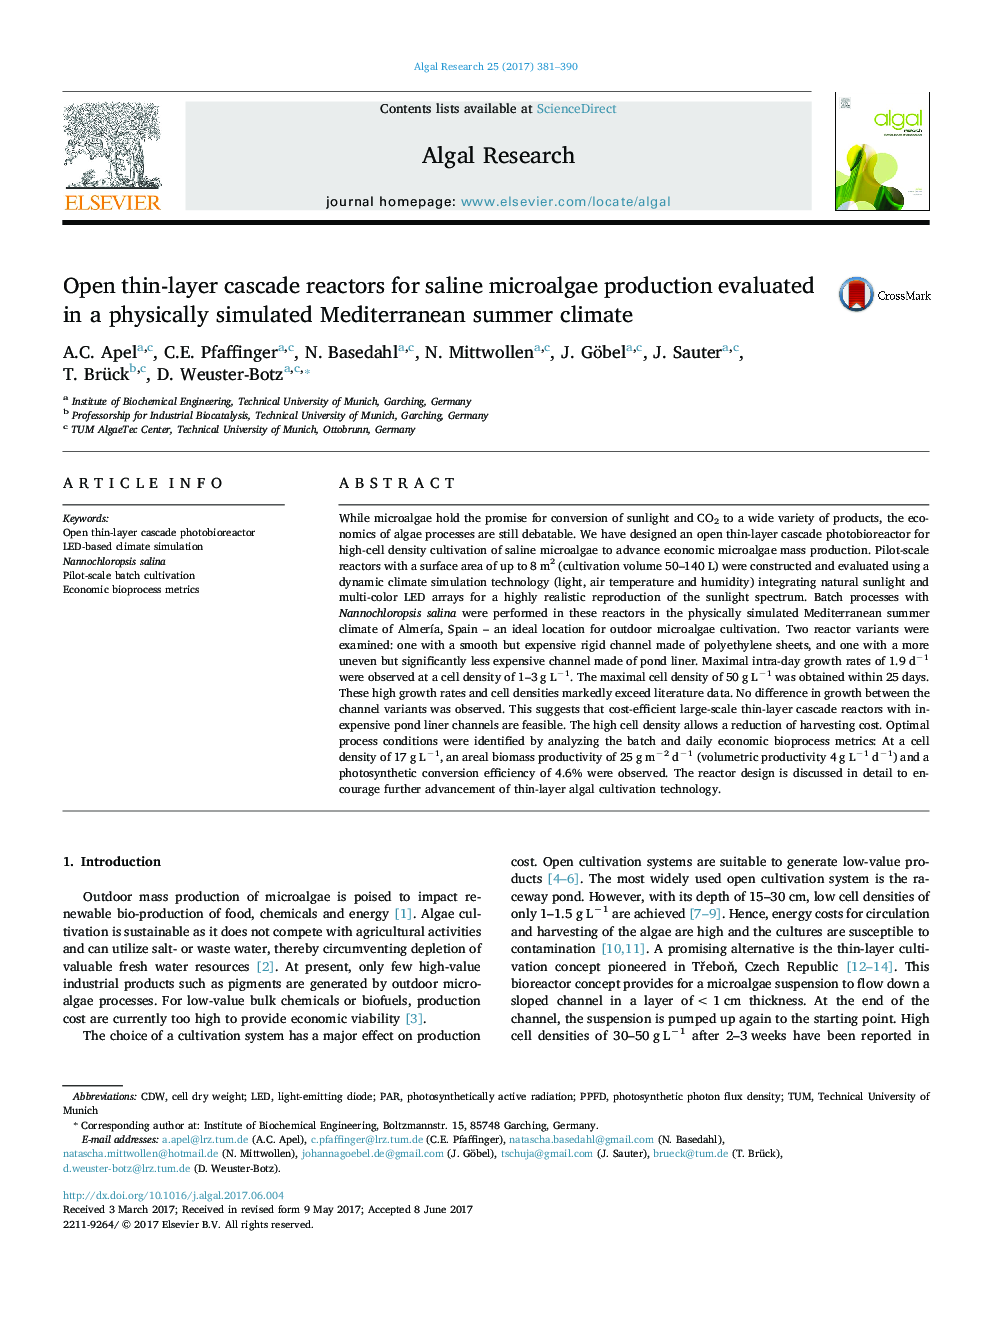 Open thin-layer cascade reactors for saline microalgae production evaluated in a physically simulated Mediterranean summer climate